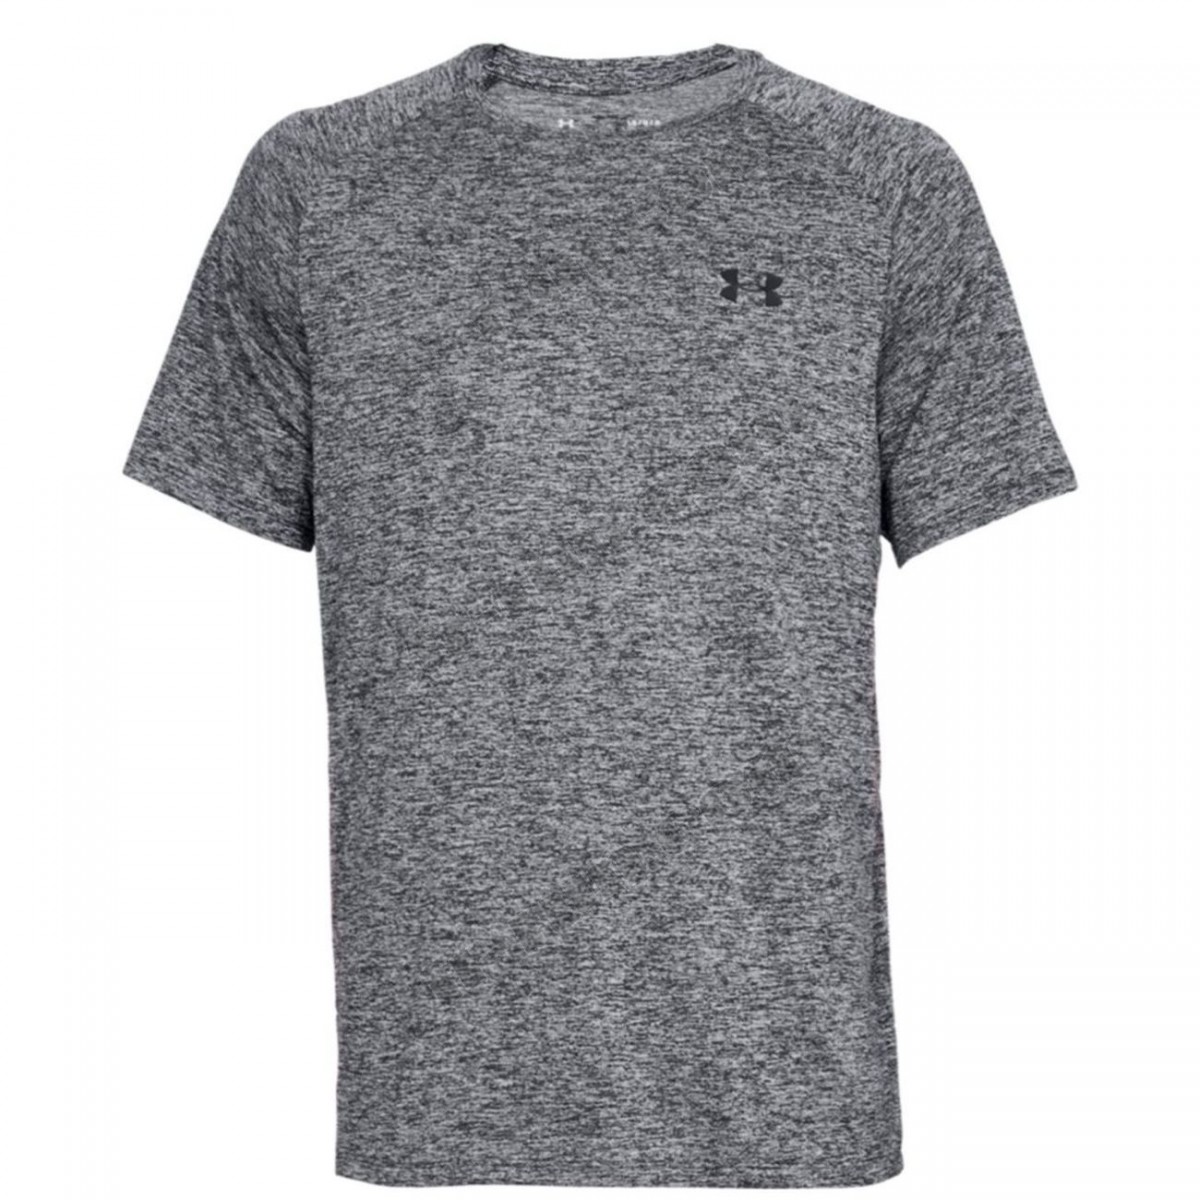 Under Armour/running adulte UNDER ARMOUR Maillot running manches courtes - Homme - UA005 - gris √ Nouveau style √ Soldes - Under Armour/running adulte UNDER ARMOUR Maillot running manches courtes - Homme - UA005 - gris √ Nouveau style √ Soldes